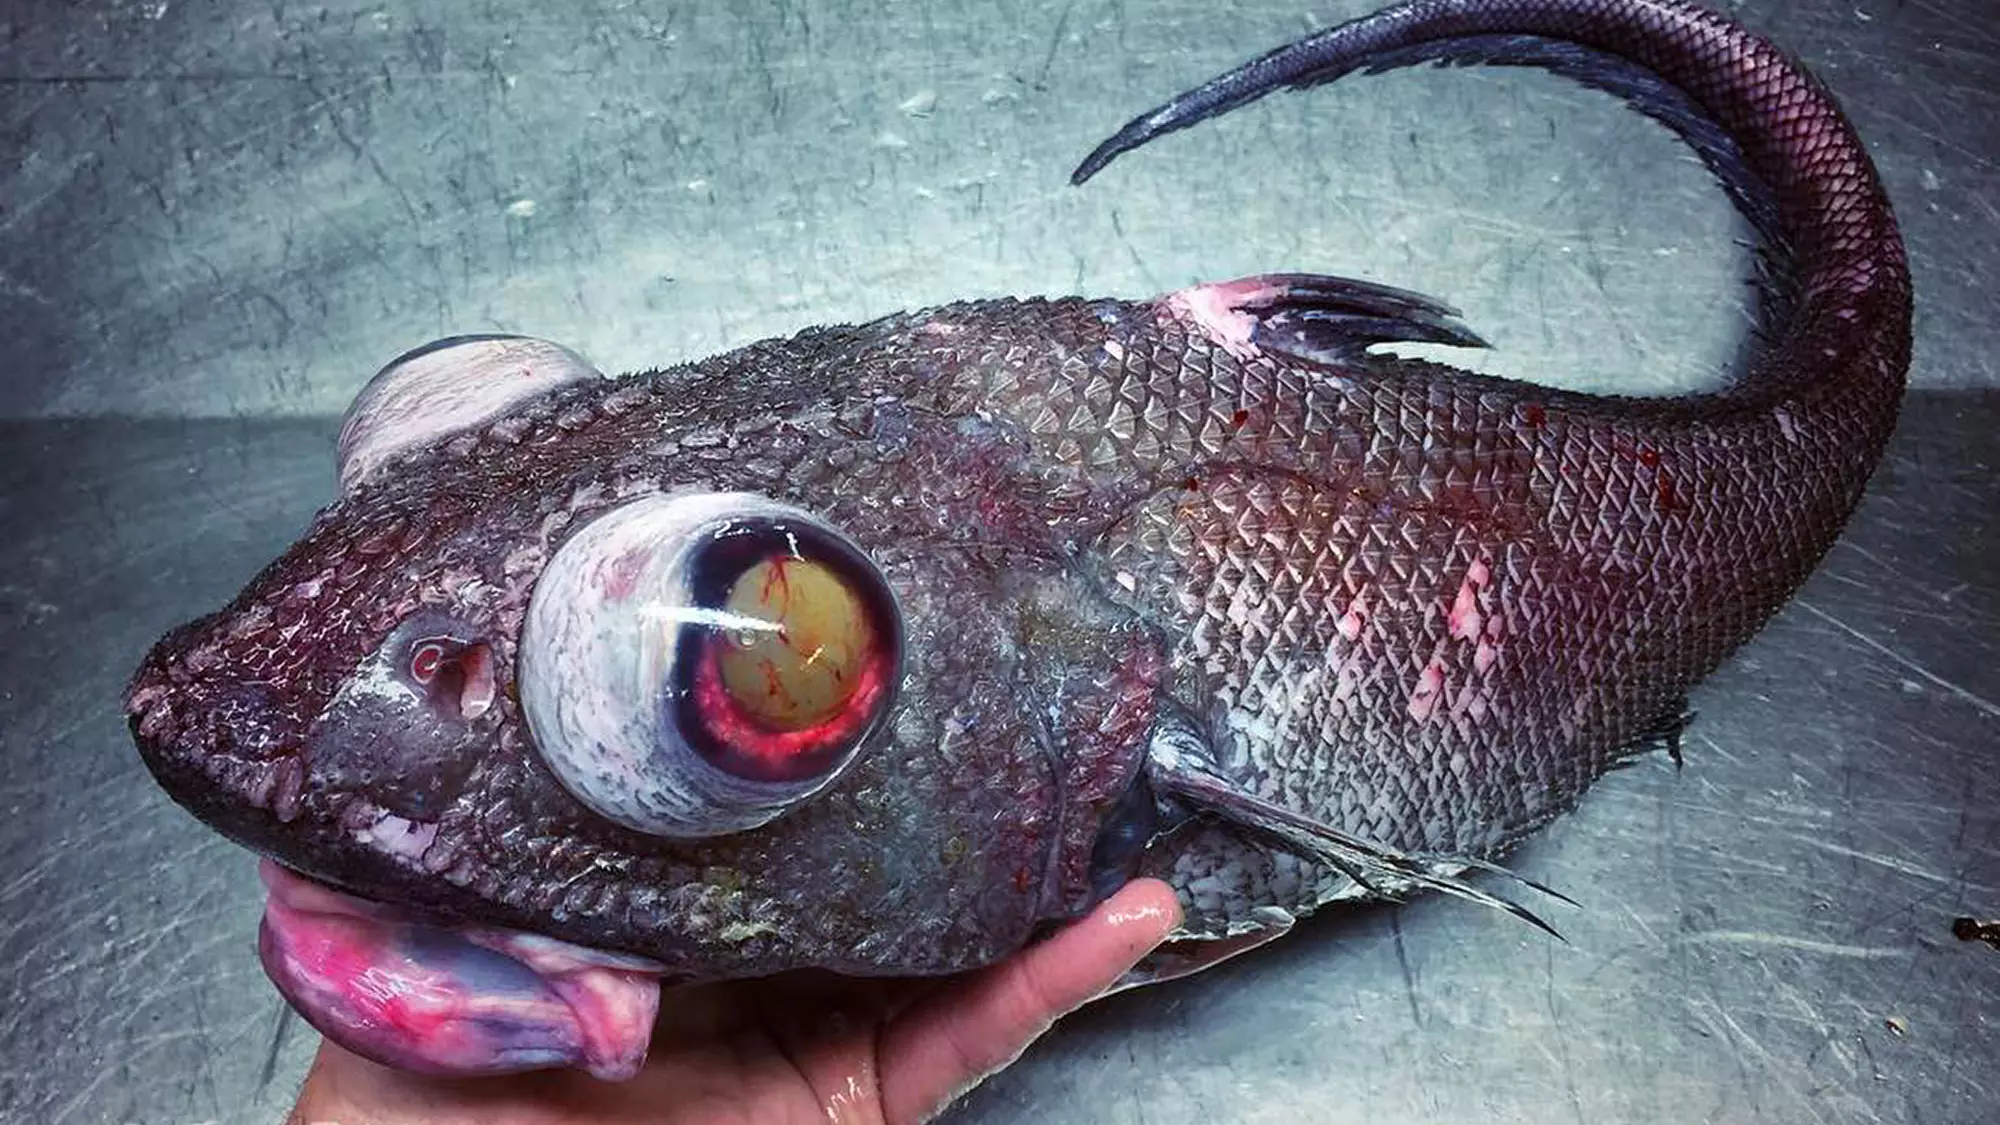 Deep Sea Fisherman Documents The 'Alien-Like' Creatures He Catches